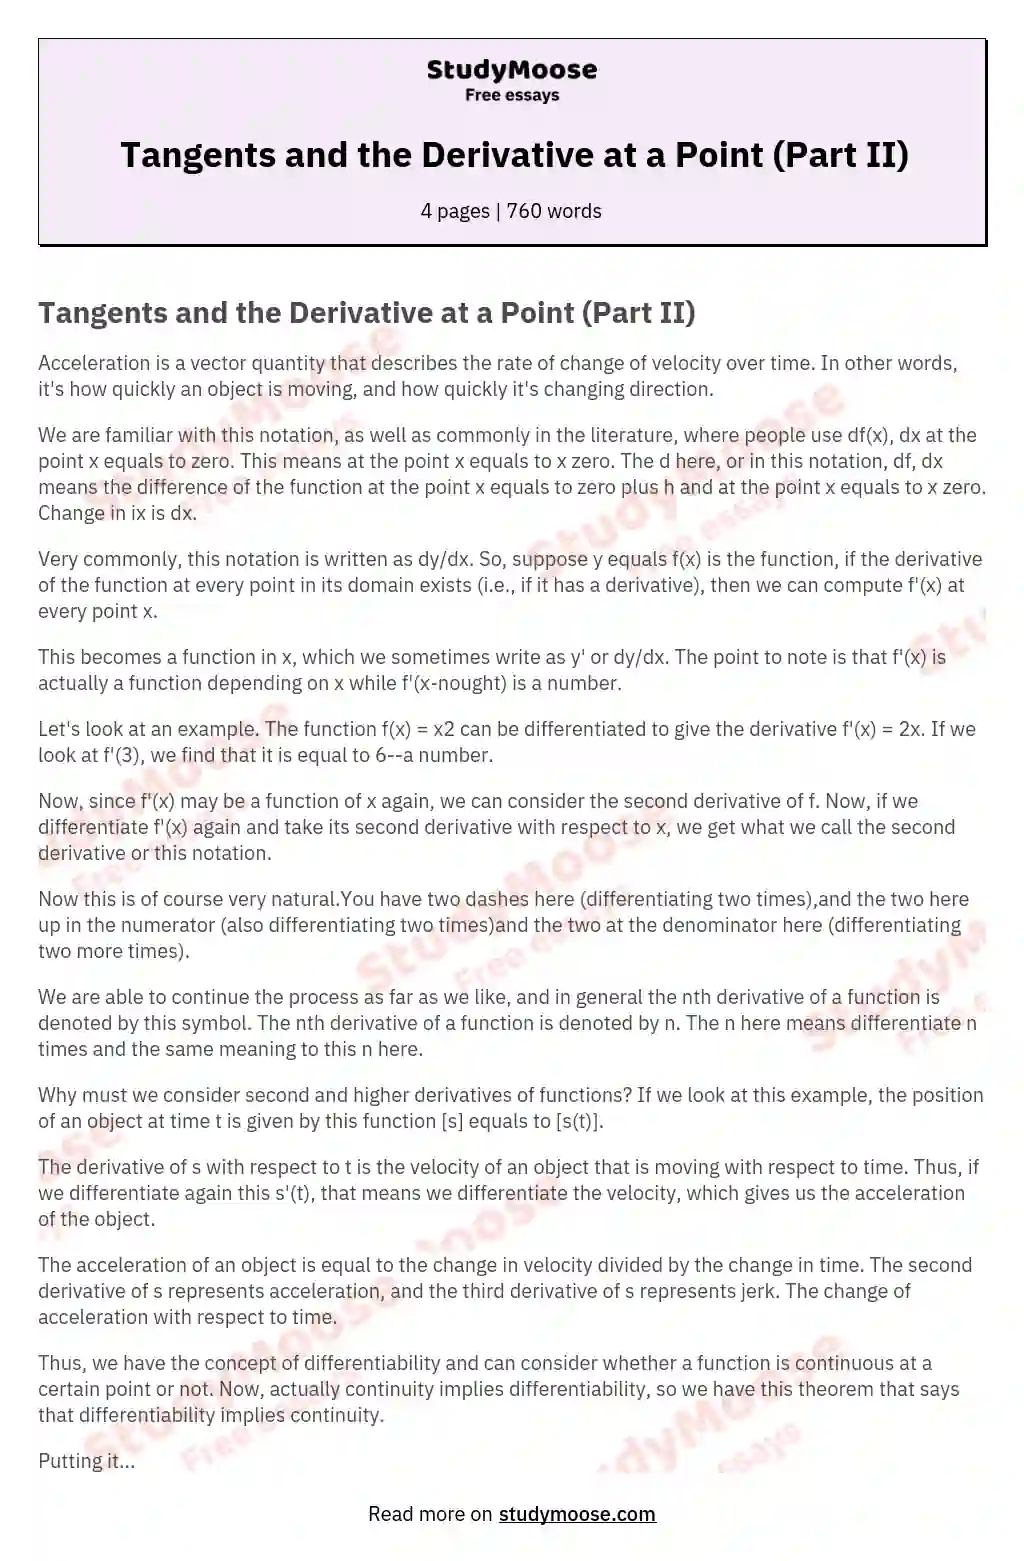 Tangents and the Derivative at a Point (Part II) essay